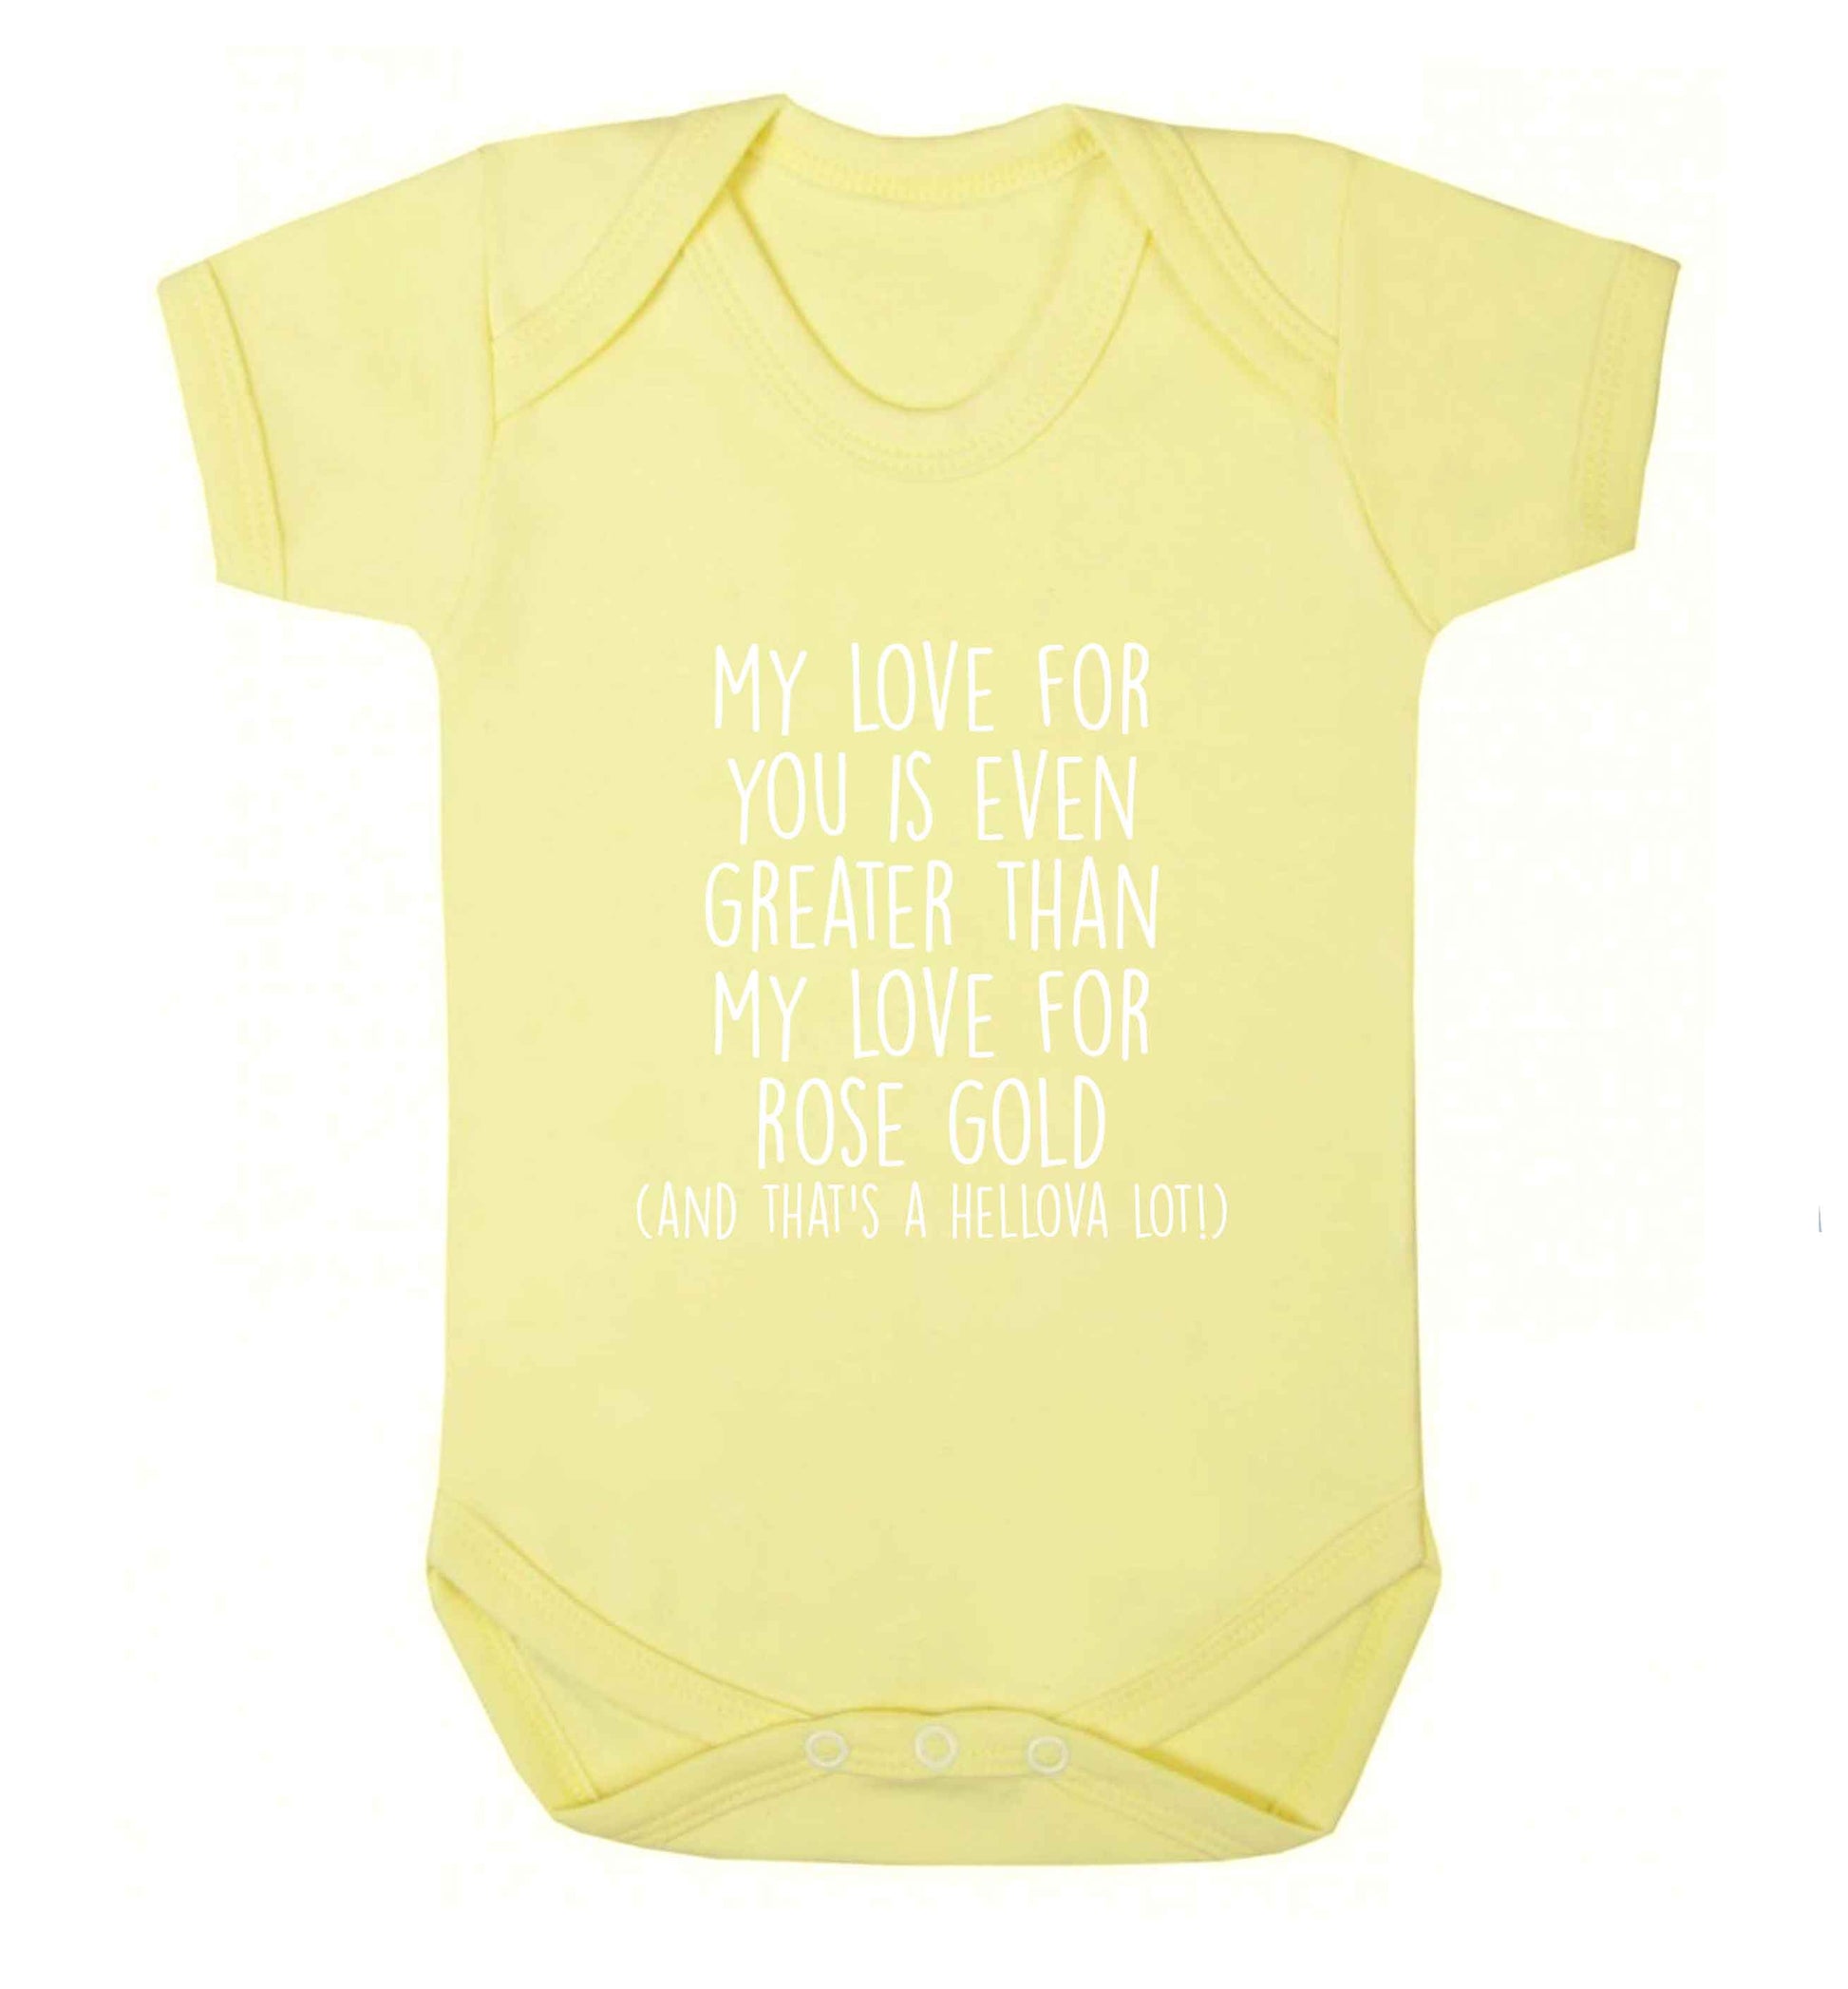 My love for you is even greater than my love for rose gold (and that's a hellova lot) baby vest pale yellow 18-24 months